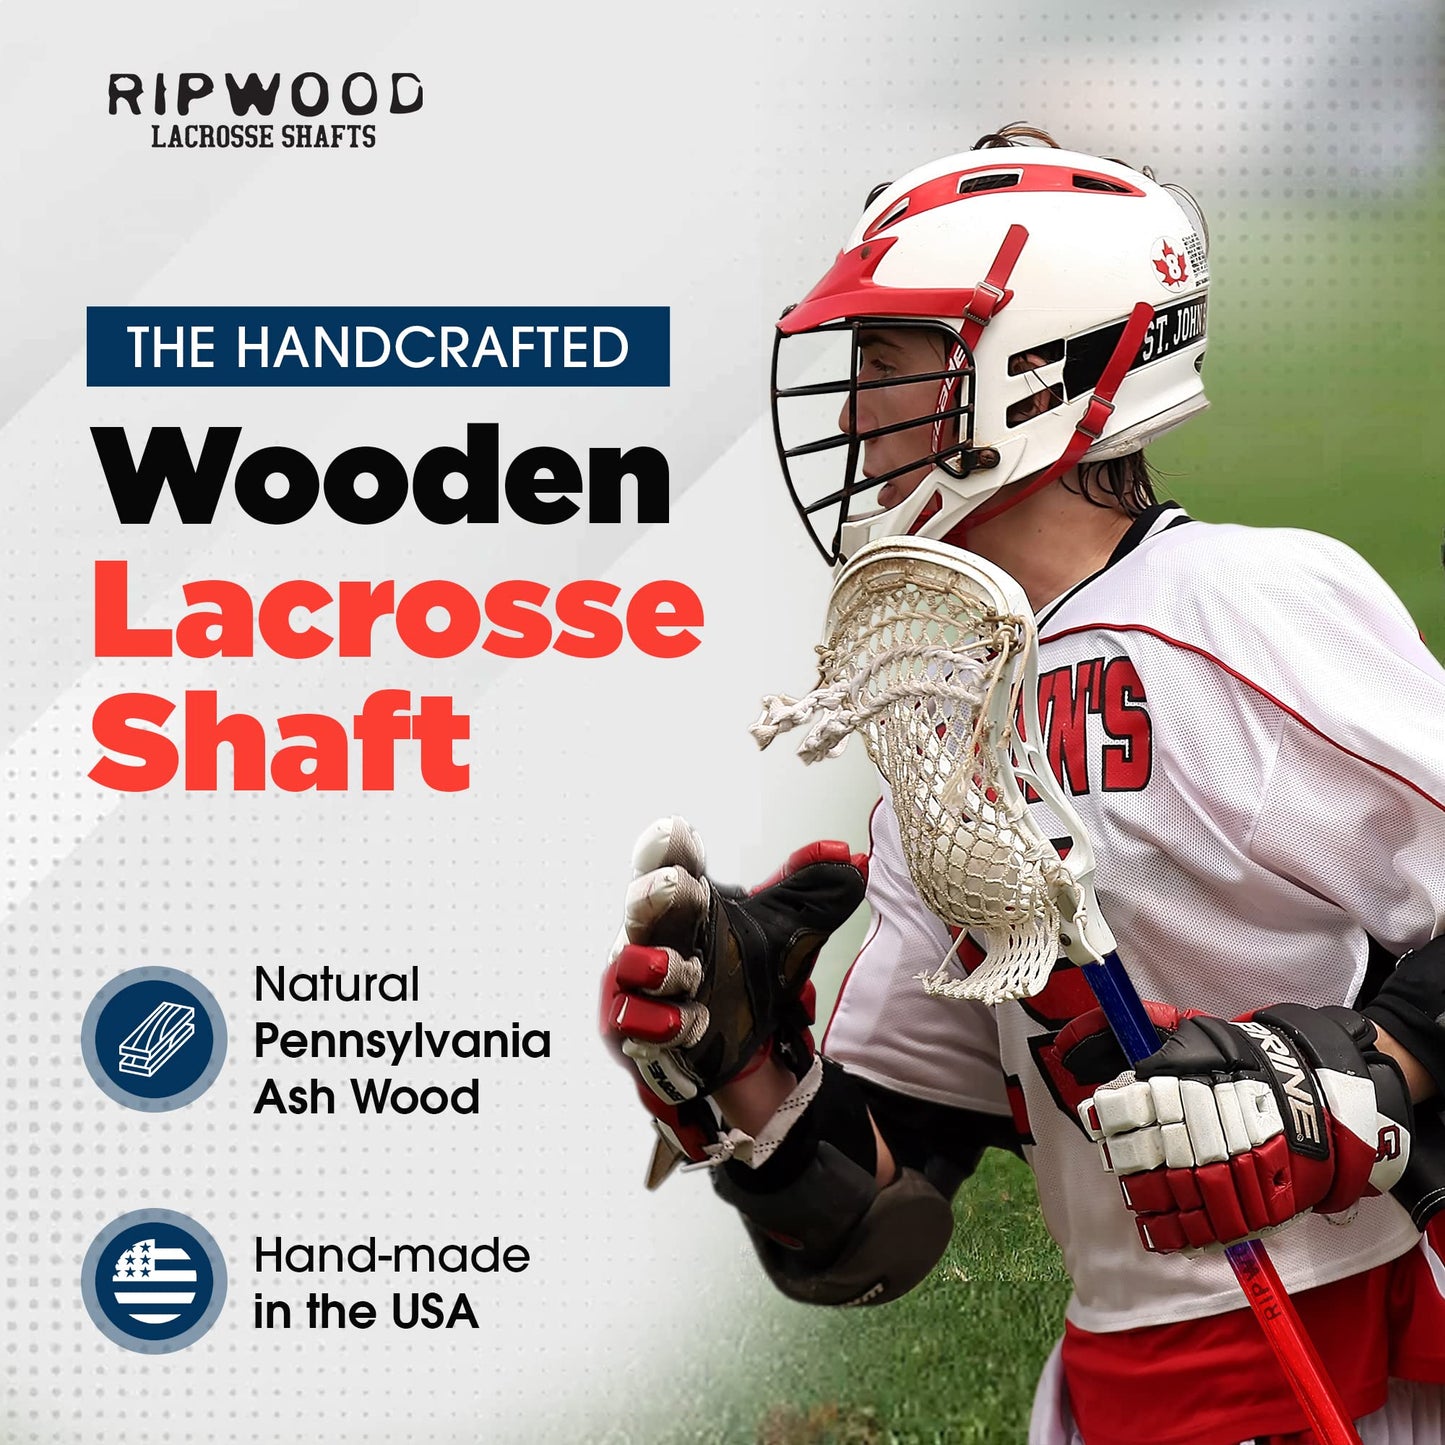 RipWood - Pennsylvania Ash Wooden Lacrosse Shaft, Durable and Flexible Lacrosse Sticks, 30-inch Lacrosse Sticks for Boys and Men of All Ages, Essential Lacrosse Equipment